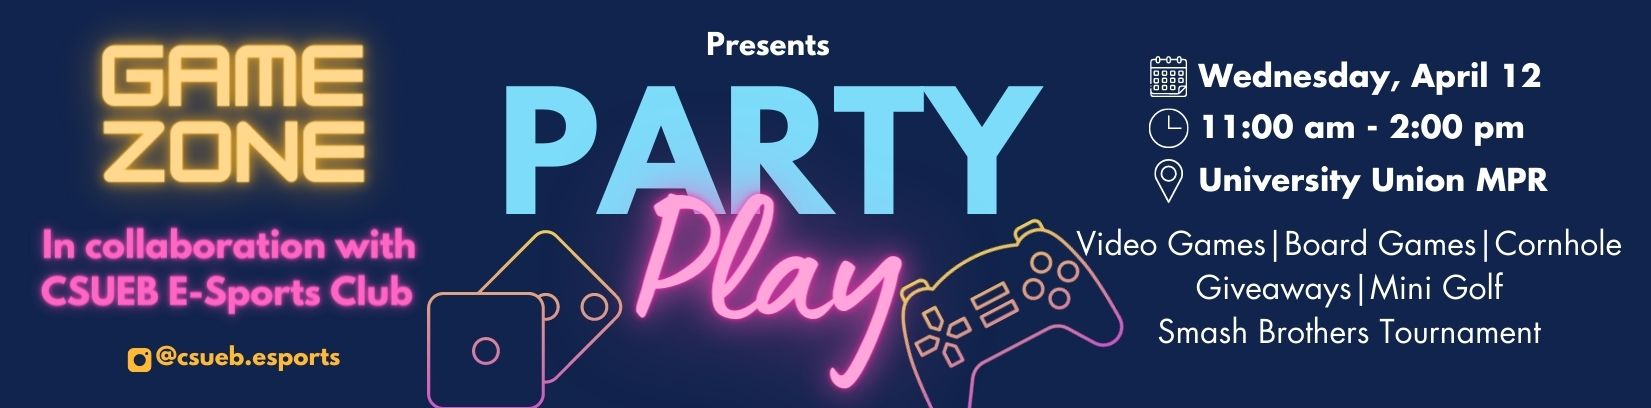 party play banner